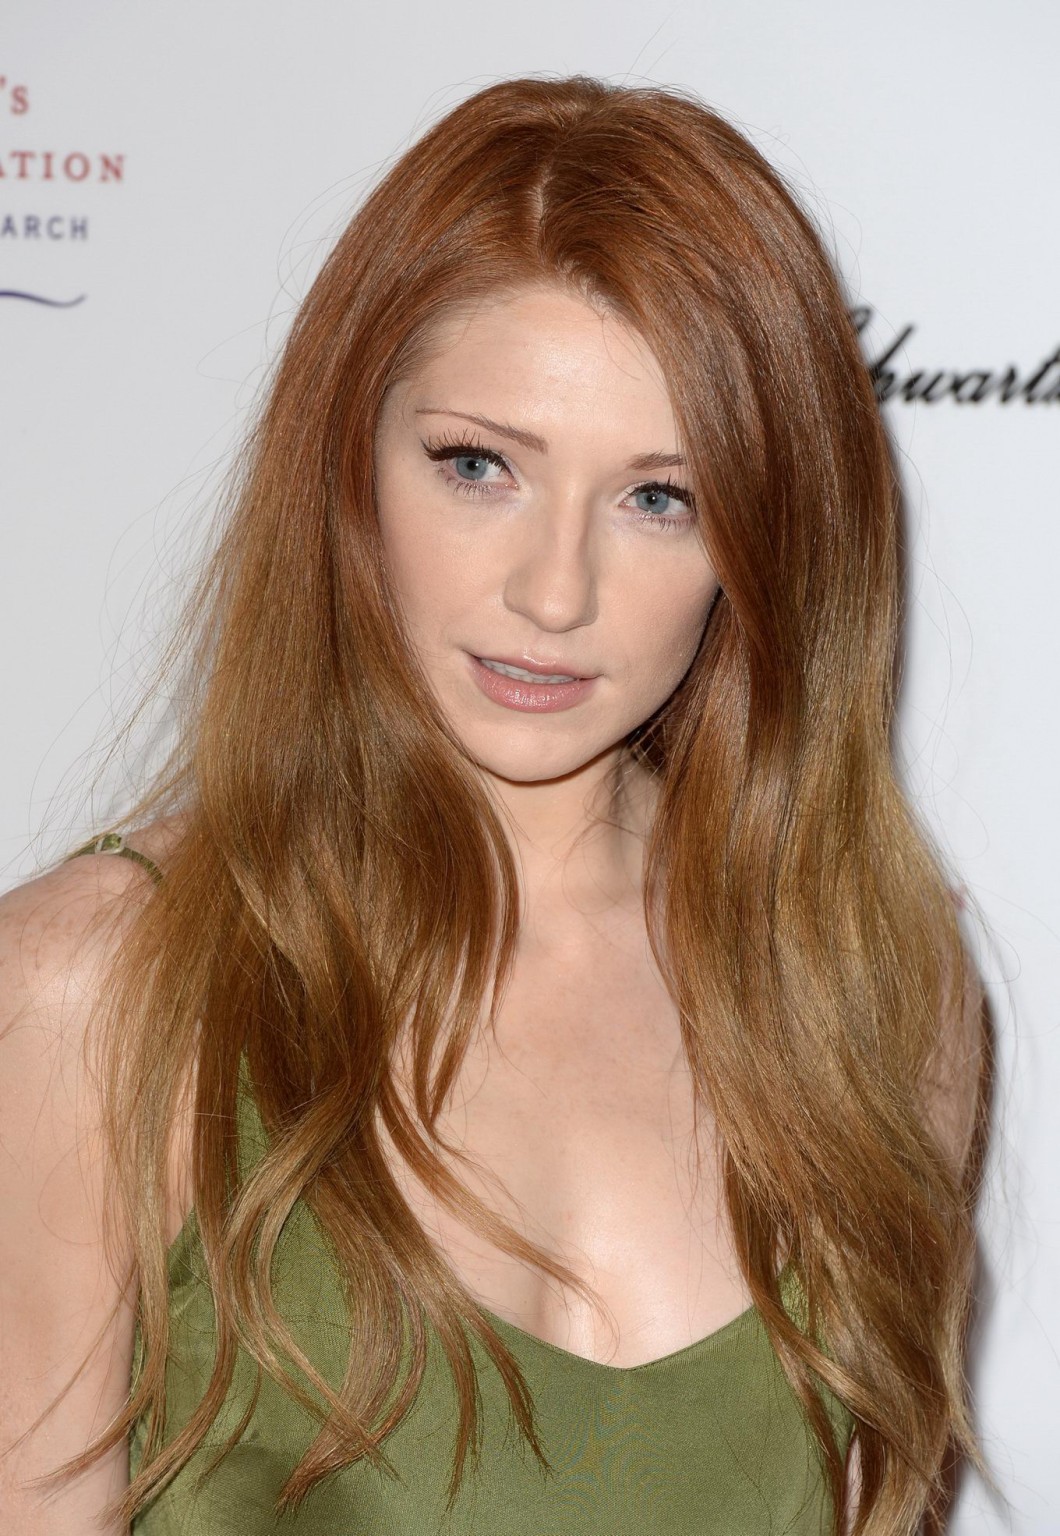 Nicola Roberts Cleavy Wearing A Low Cut Dress At The Gabrielles Gala Fundraiser Porn Pictures